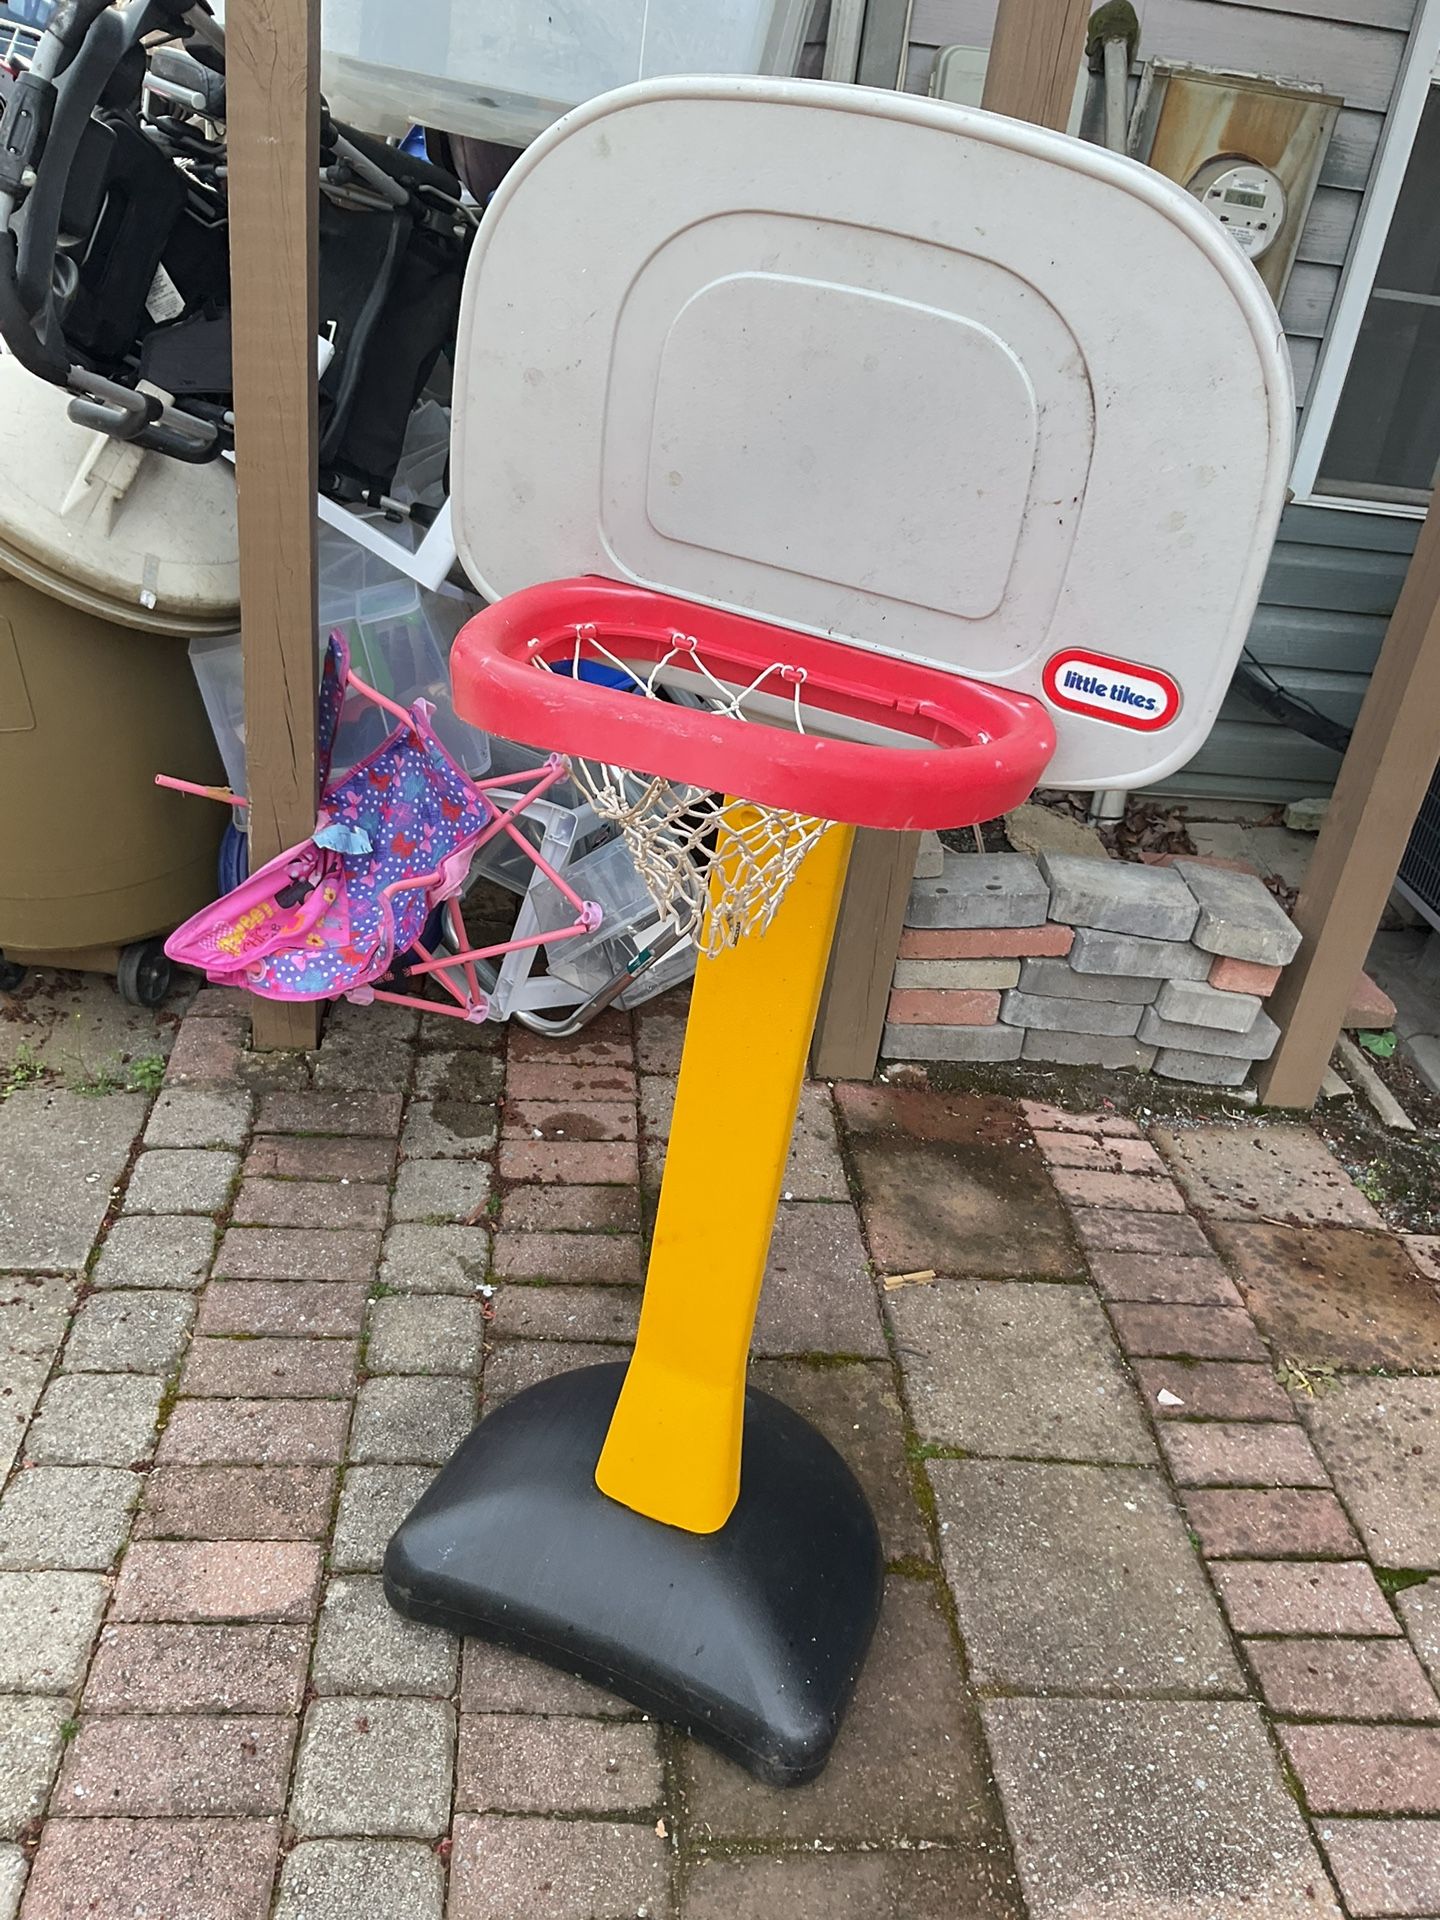 A Nice Size Basketball Hoop For Children To Enjoy Outside (NO SHIPPING)